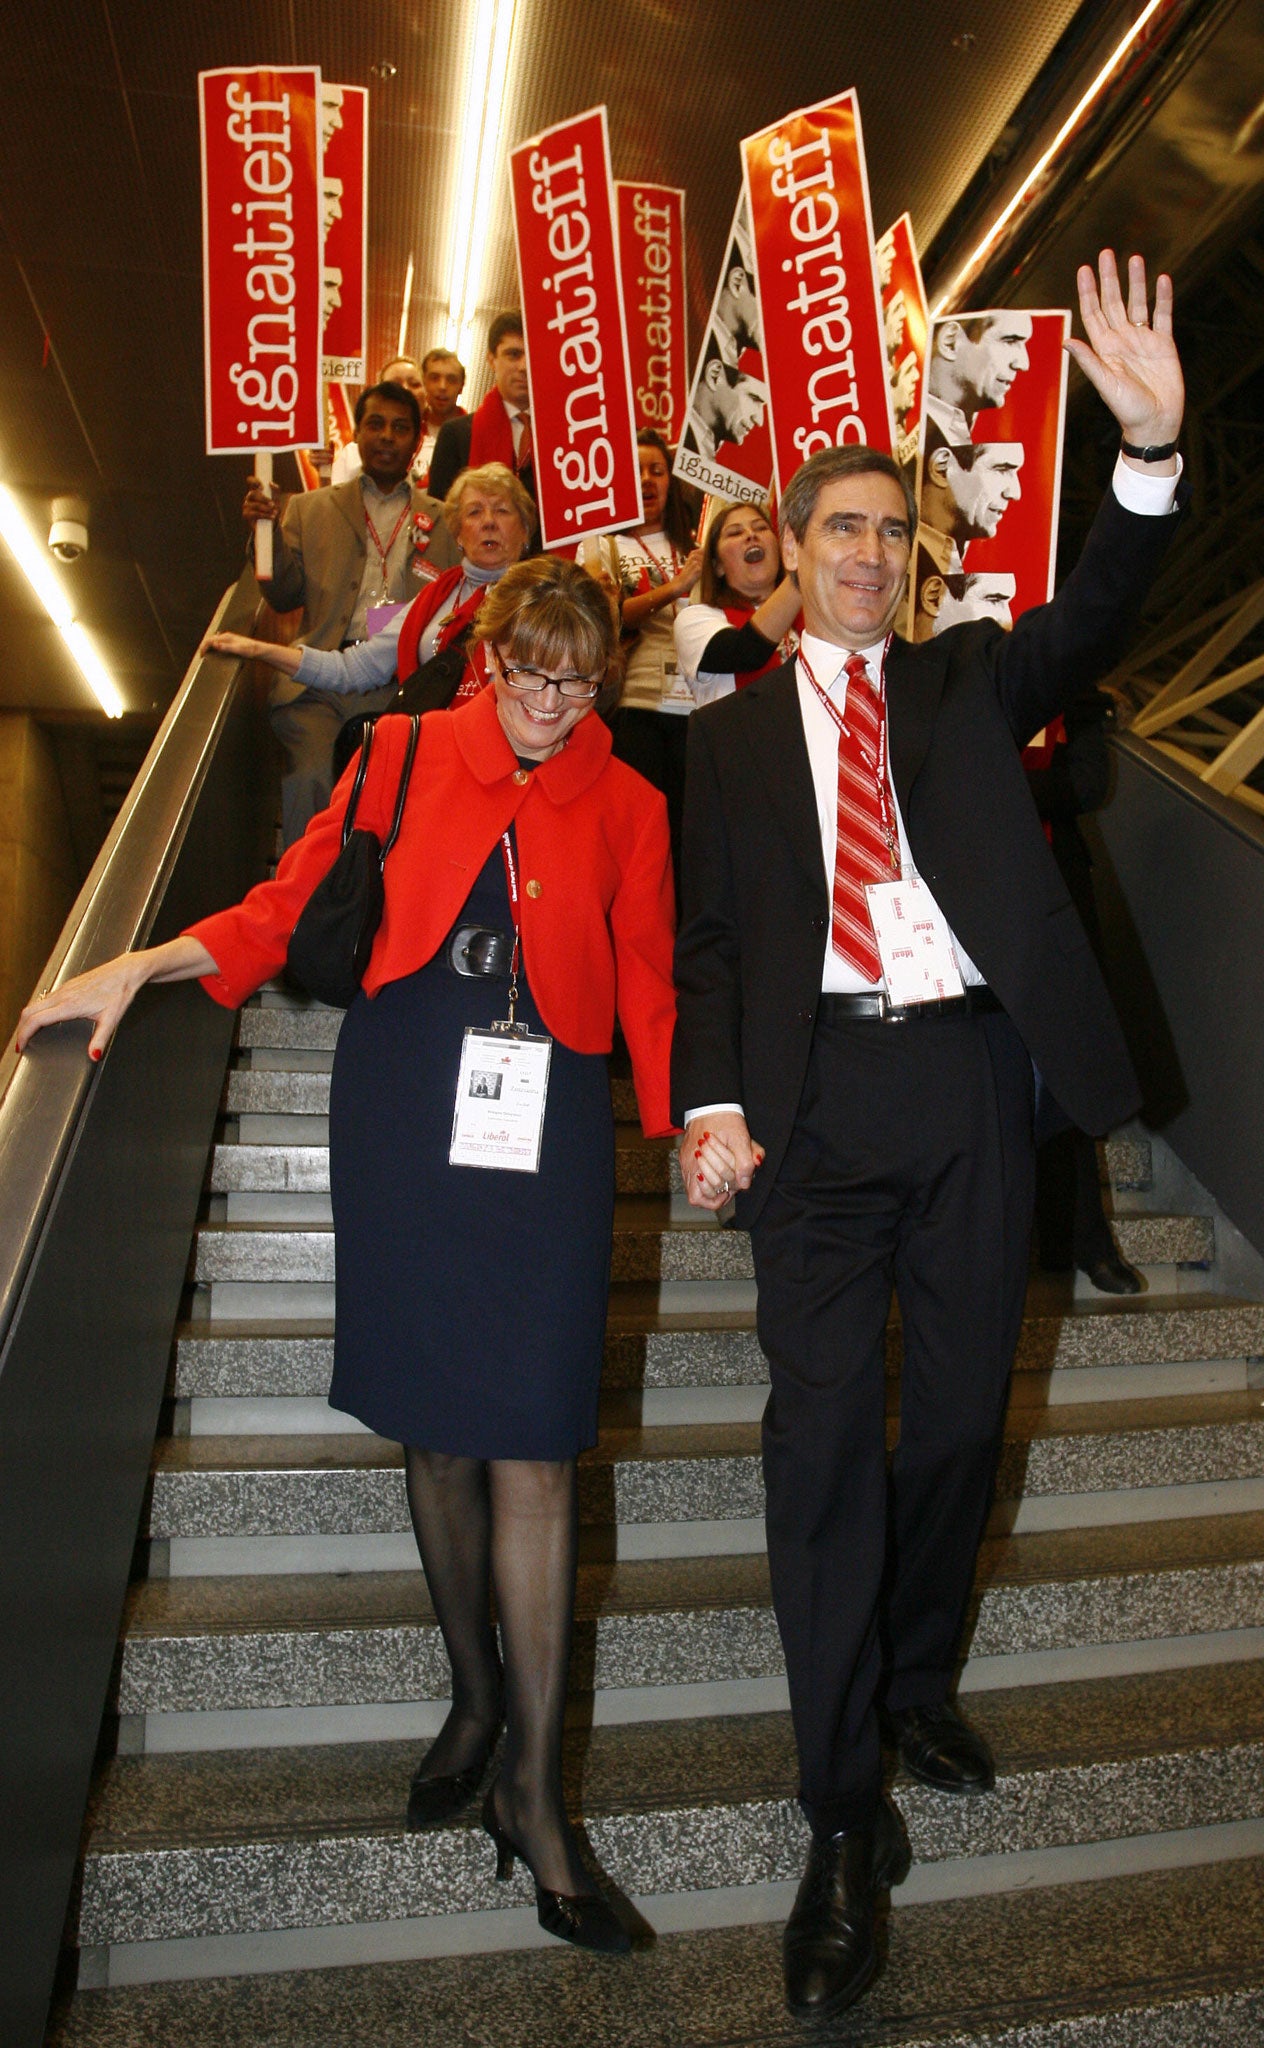 Pursuing the 'flame of power': Michael Ignatieff and his wife Zsuzsanna Zsohar in Montreal, 2006